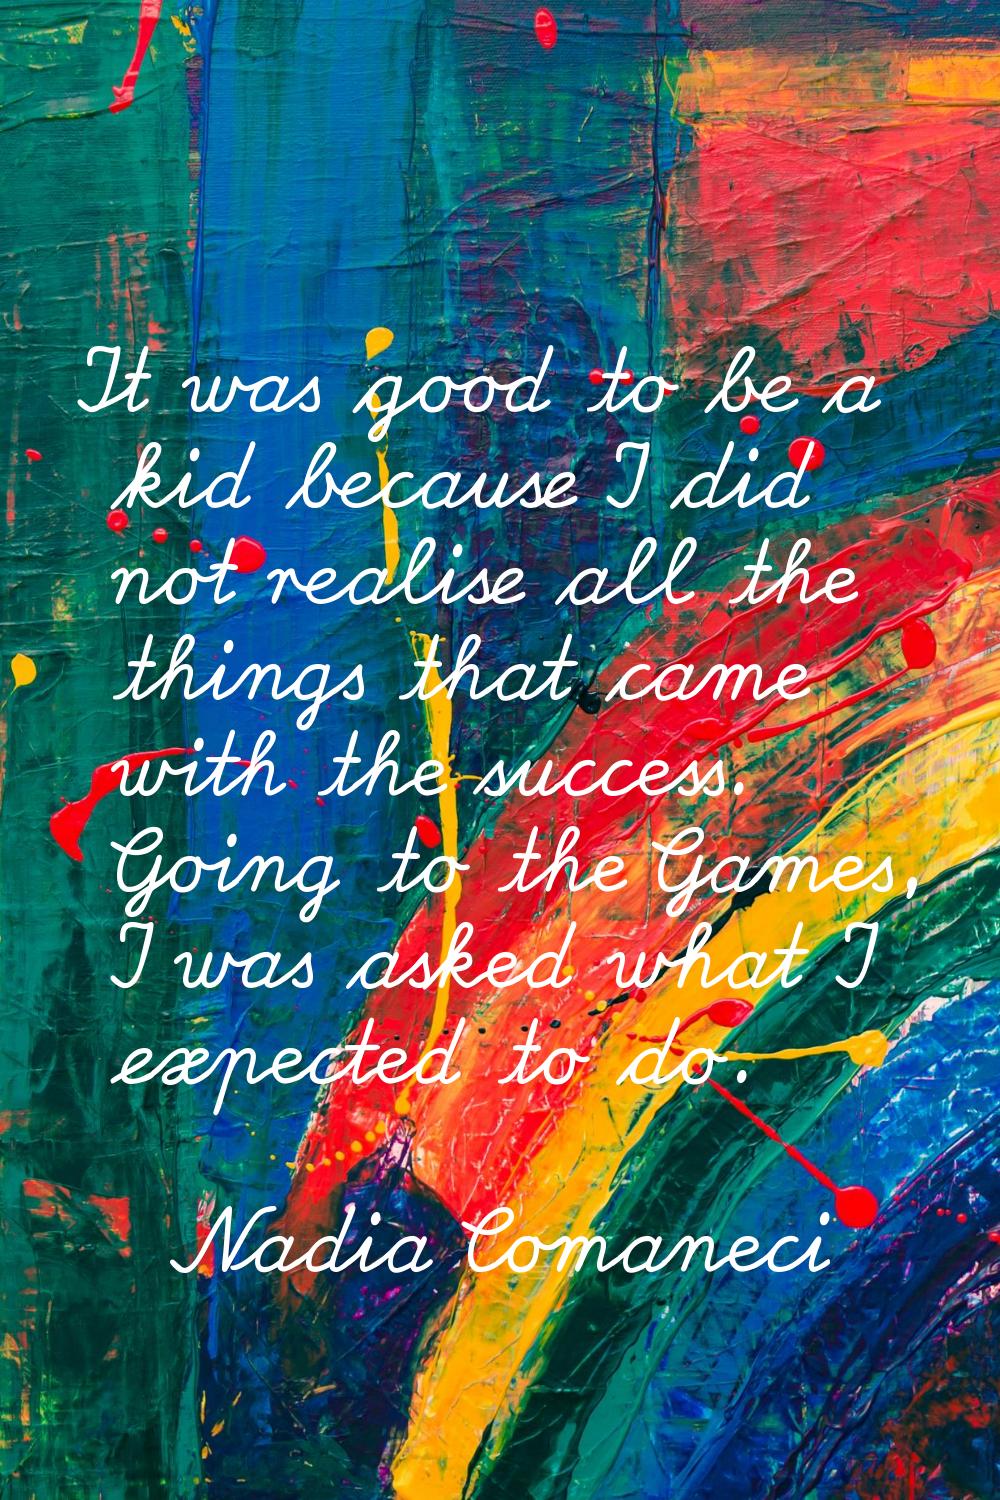 It was good to be a kid because I did not realise all the things that came with the success. Going 